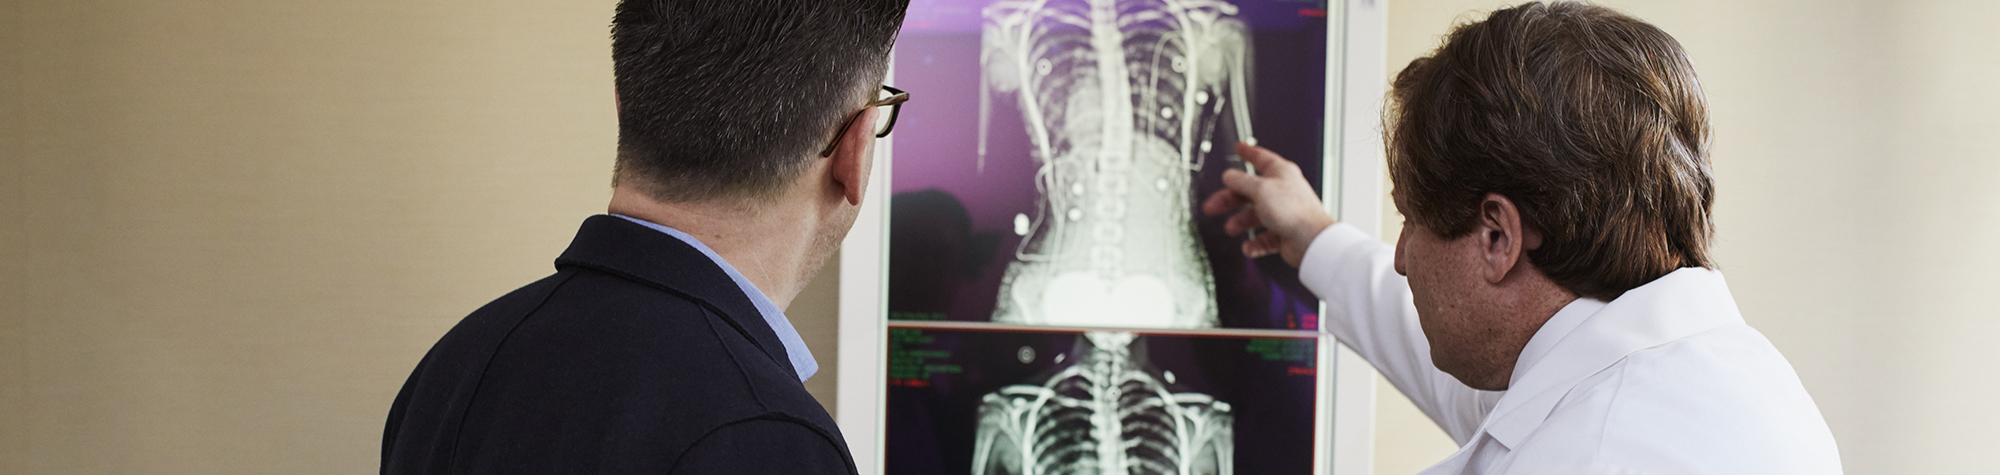 The Coming Future of Medical Imaging: Artificial Intelligence, Cloud-Processing and Beyond